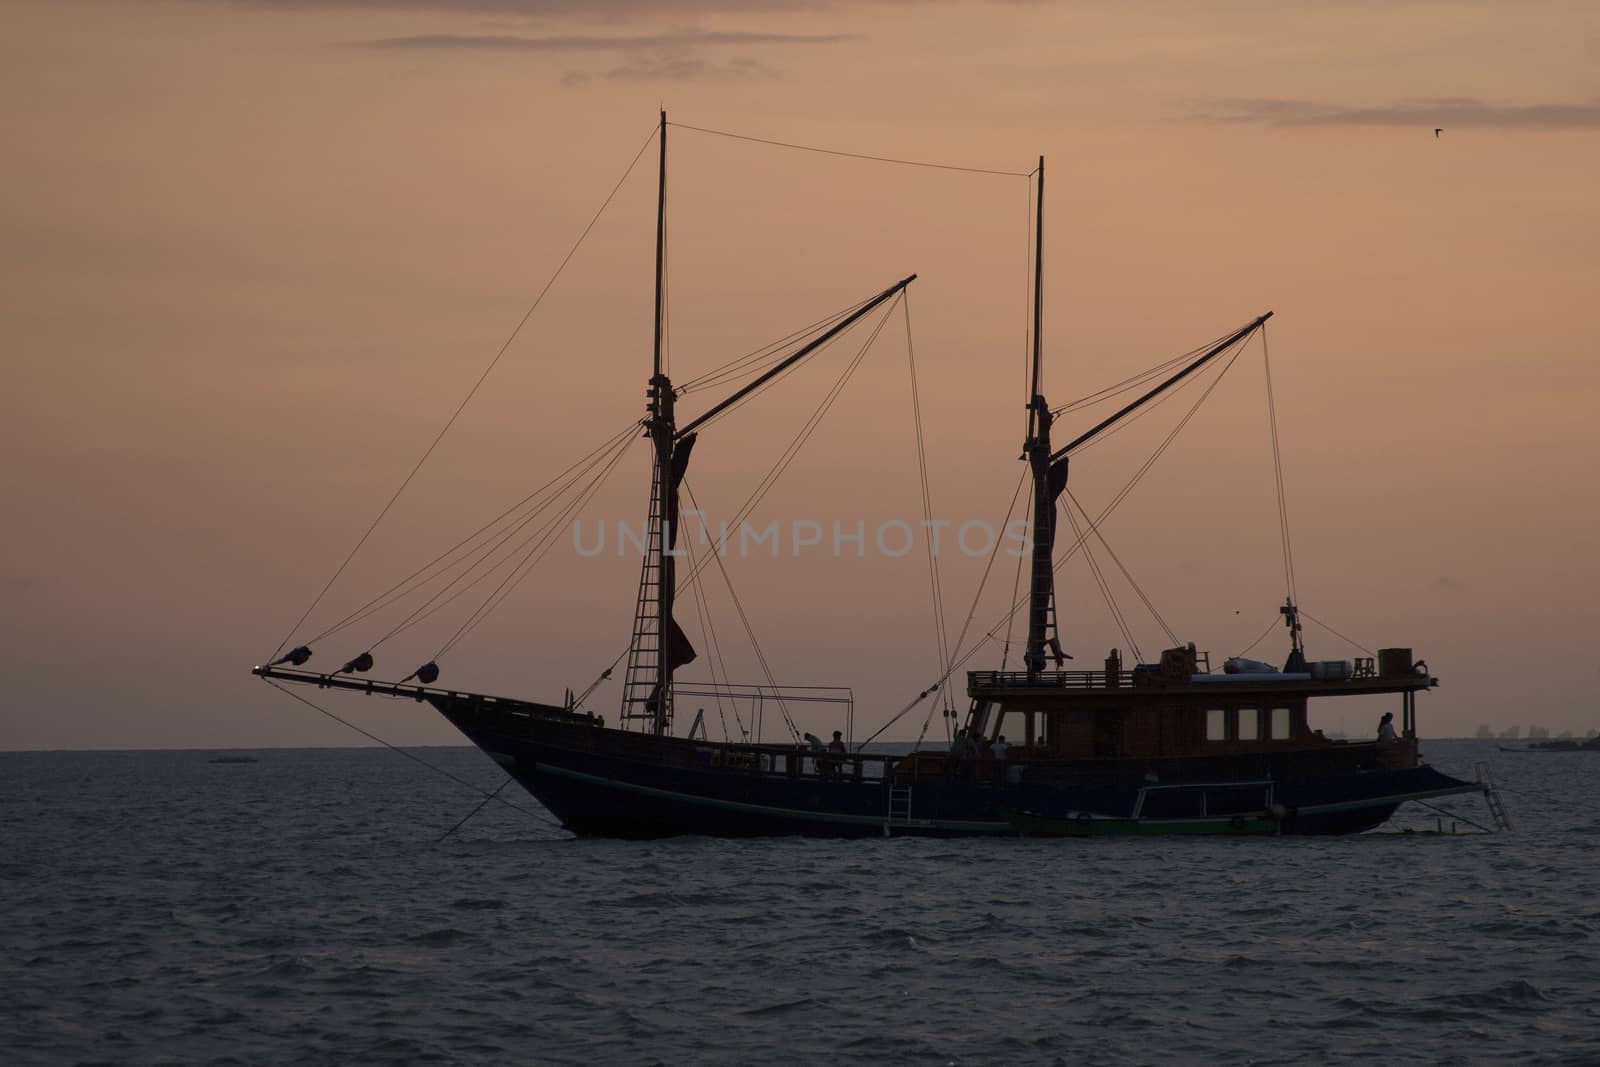 silhouette phinisi wooden ship at sunset, a traditional wooden boat from Sulawesi Indonesia